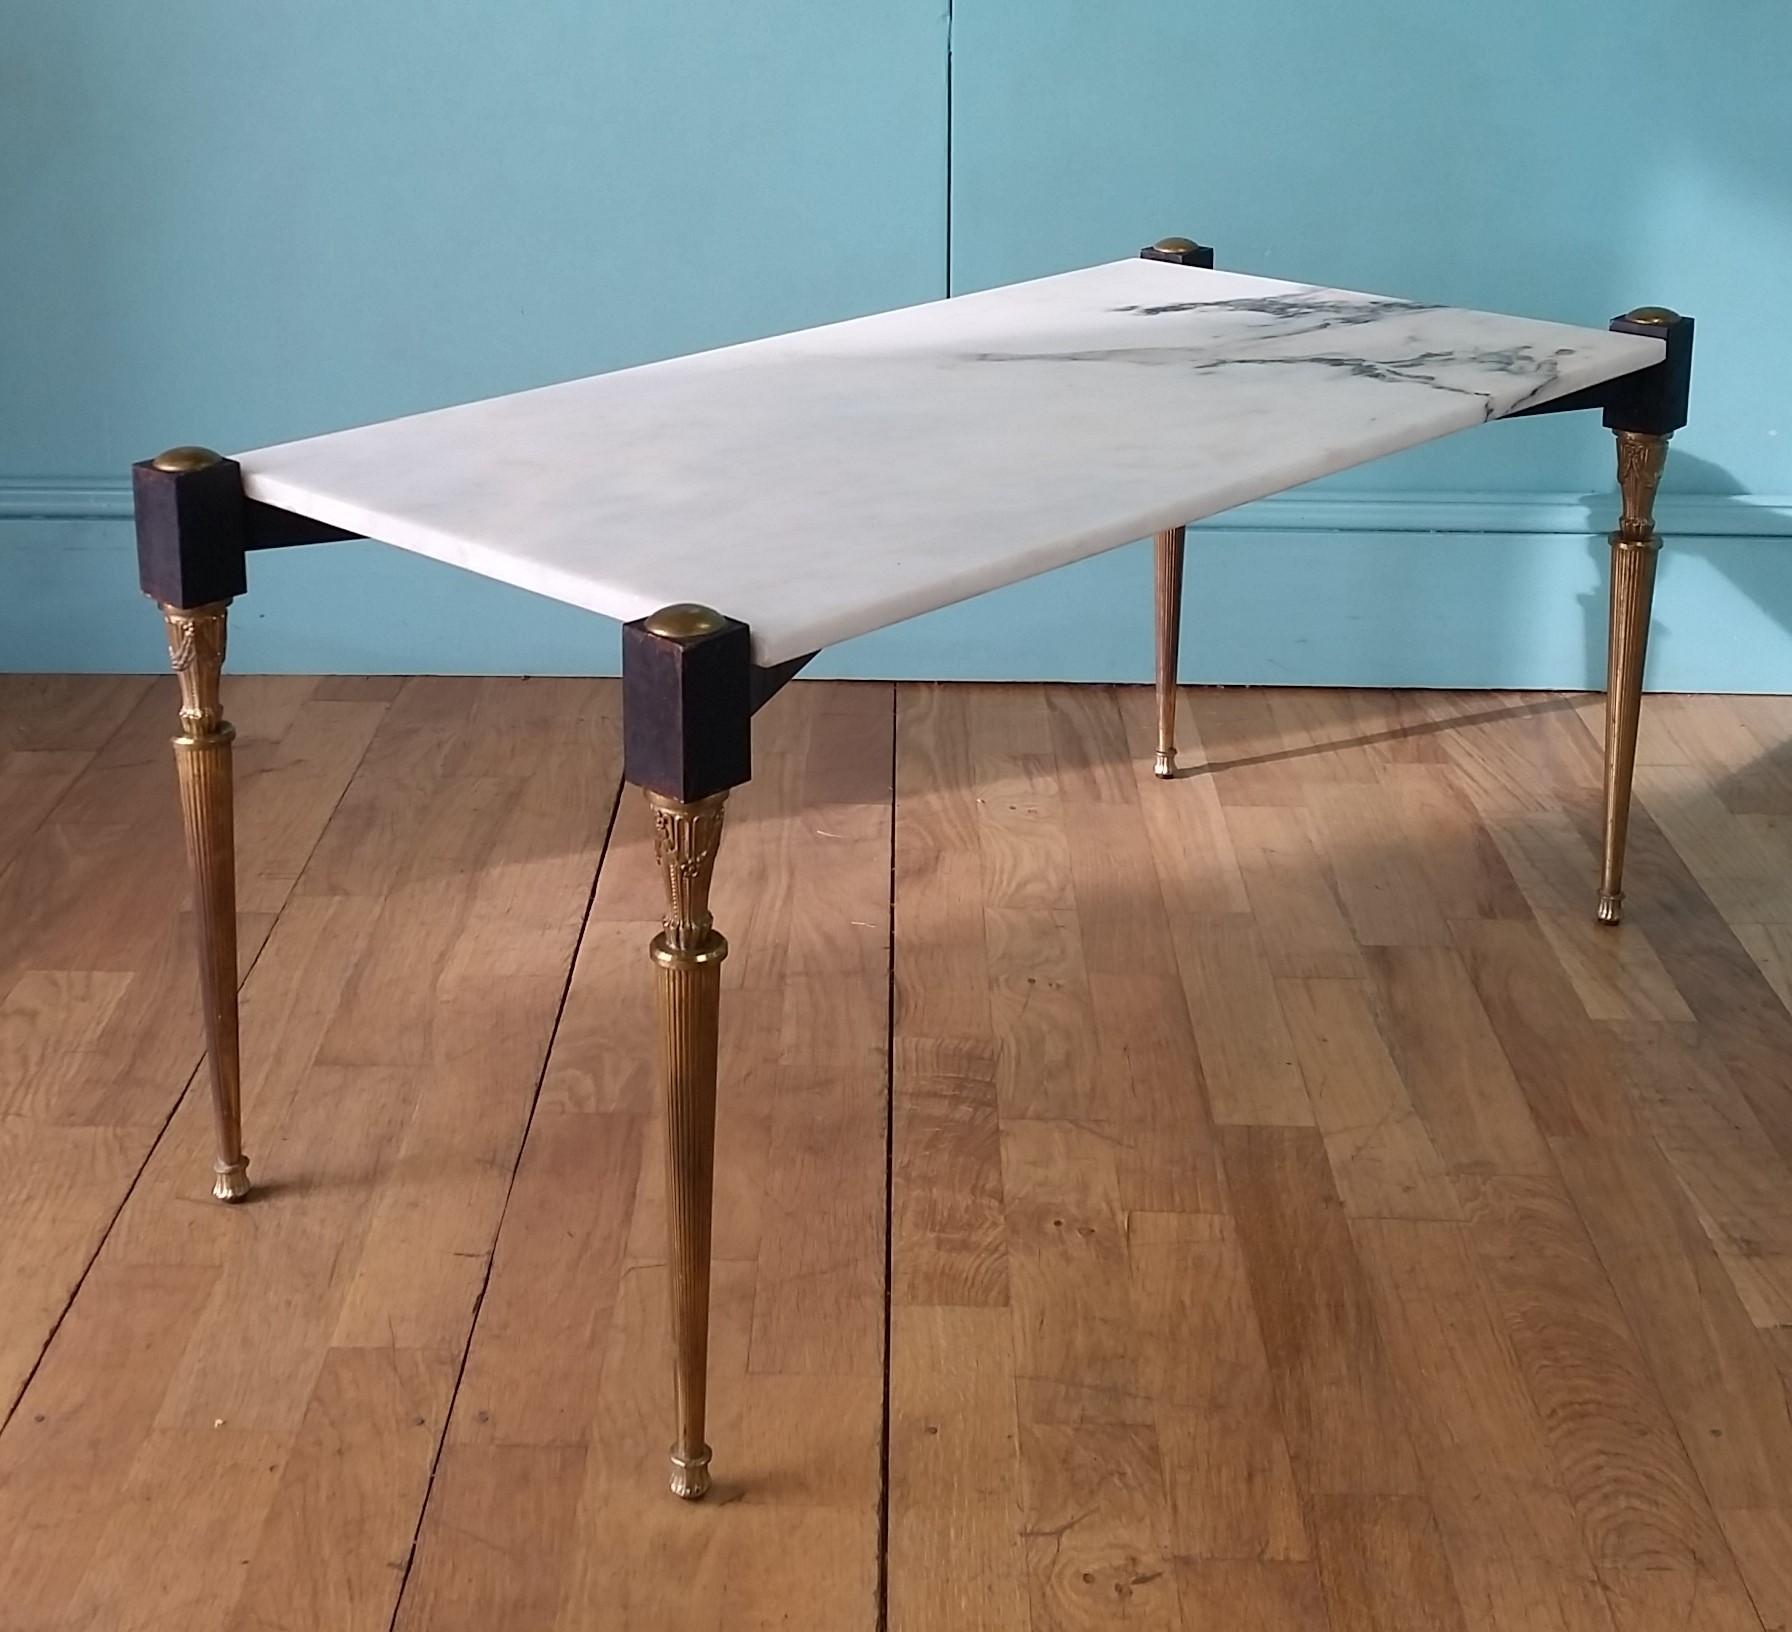 Italian mid century coffee table circa 1950's
Decorative brass legs with a steel cross stretcher base support a white marble top.
In lovely authentic condition with a natural tarnishing of the brass and an aged wear to the original black